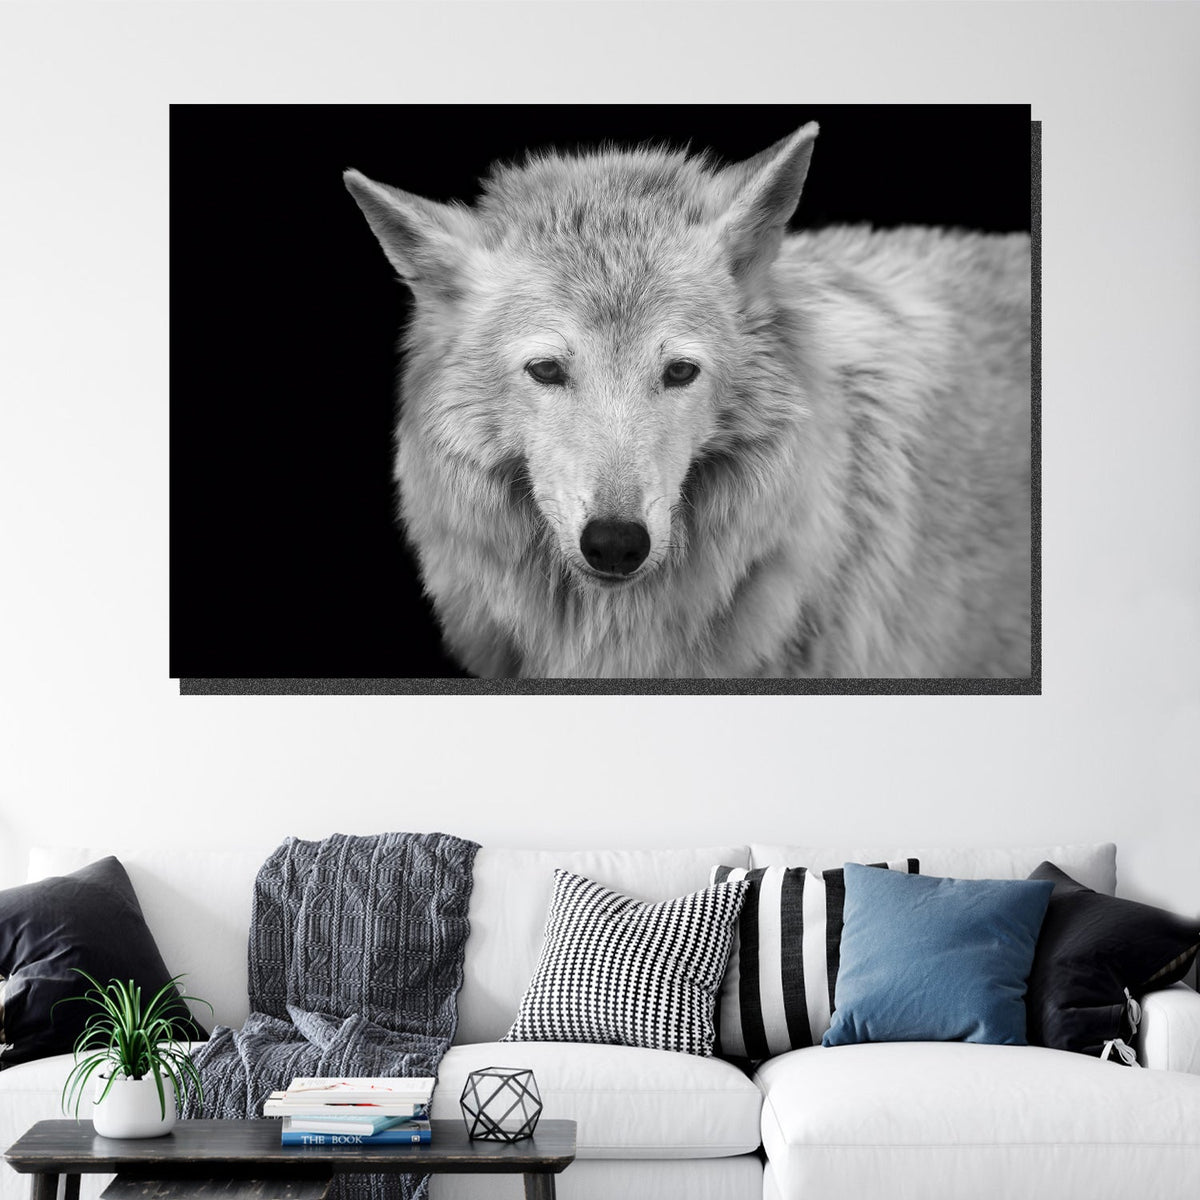 https://cdn.shopify.com/s/files/1/0387/9986/8044/products/WildForestWolfCanvasArtprintStretched-2.jpg